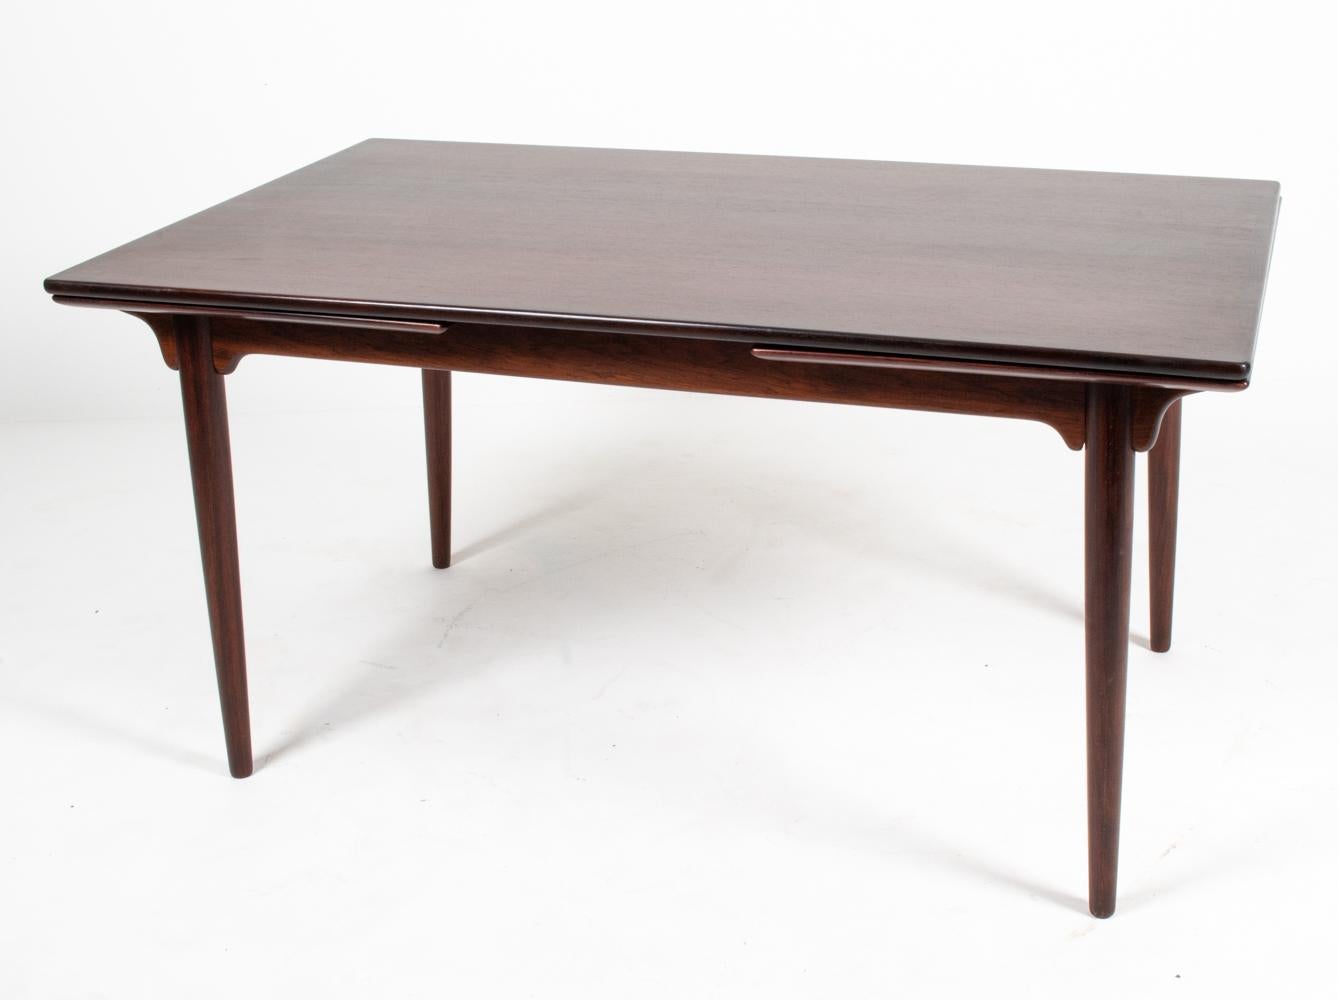 Turn your dining room into a destination with this exquisite dining table by Gunni Omann for Omann Jun, which features a Dutch-style draw leaf top supported by elegant tapered legs and subtle bracket-style braces. The table is finished in dark, rich